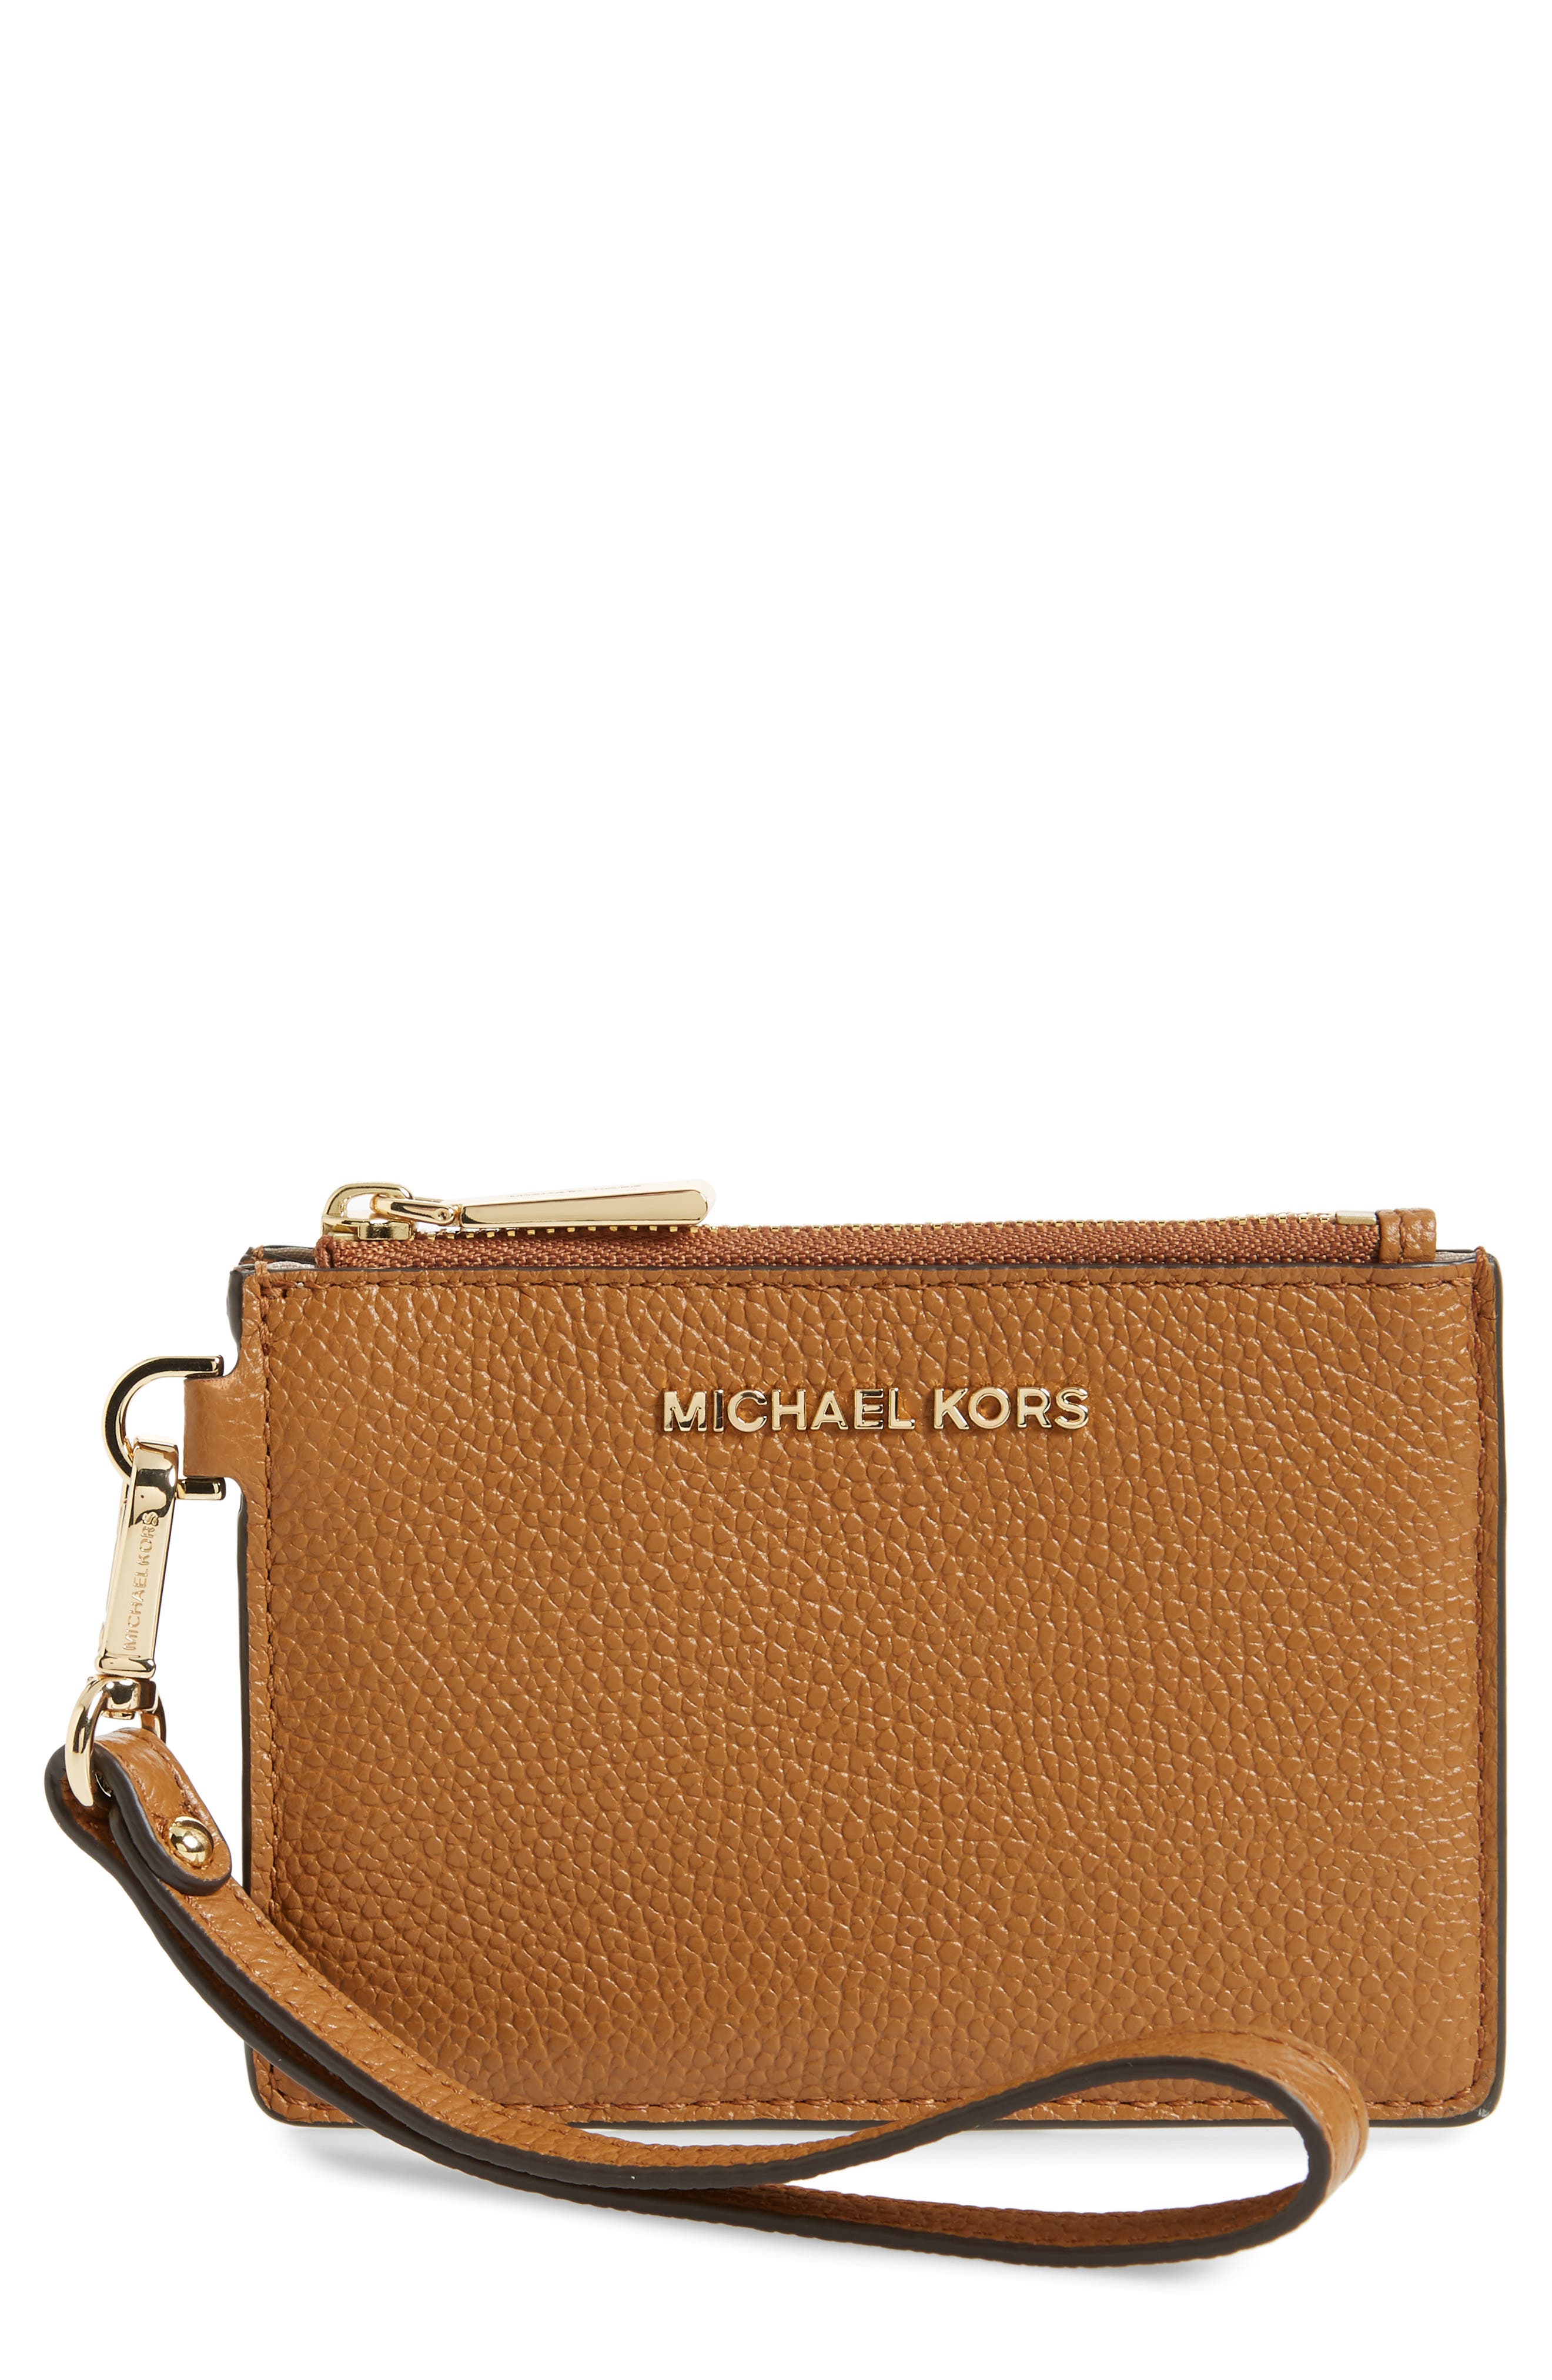 michael kors pebbled leather coin purse